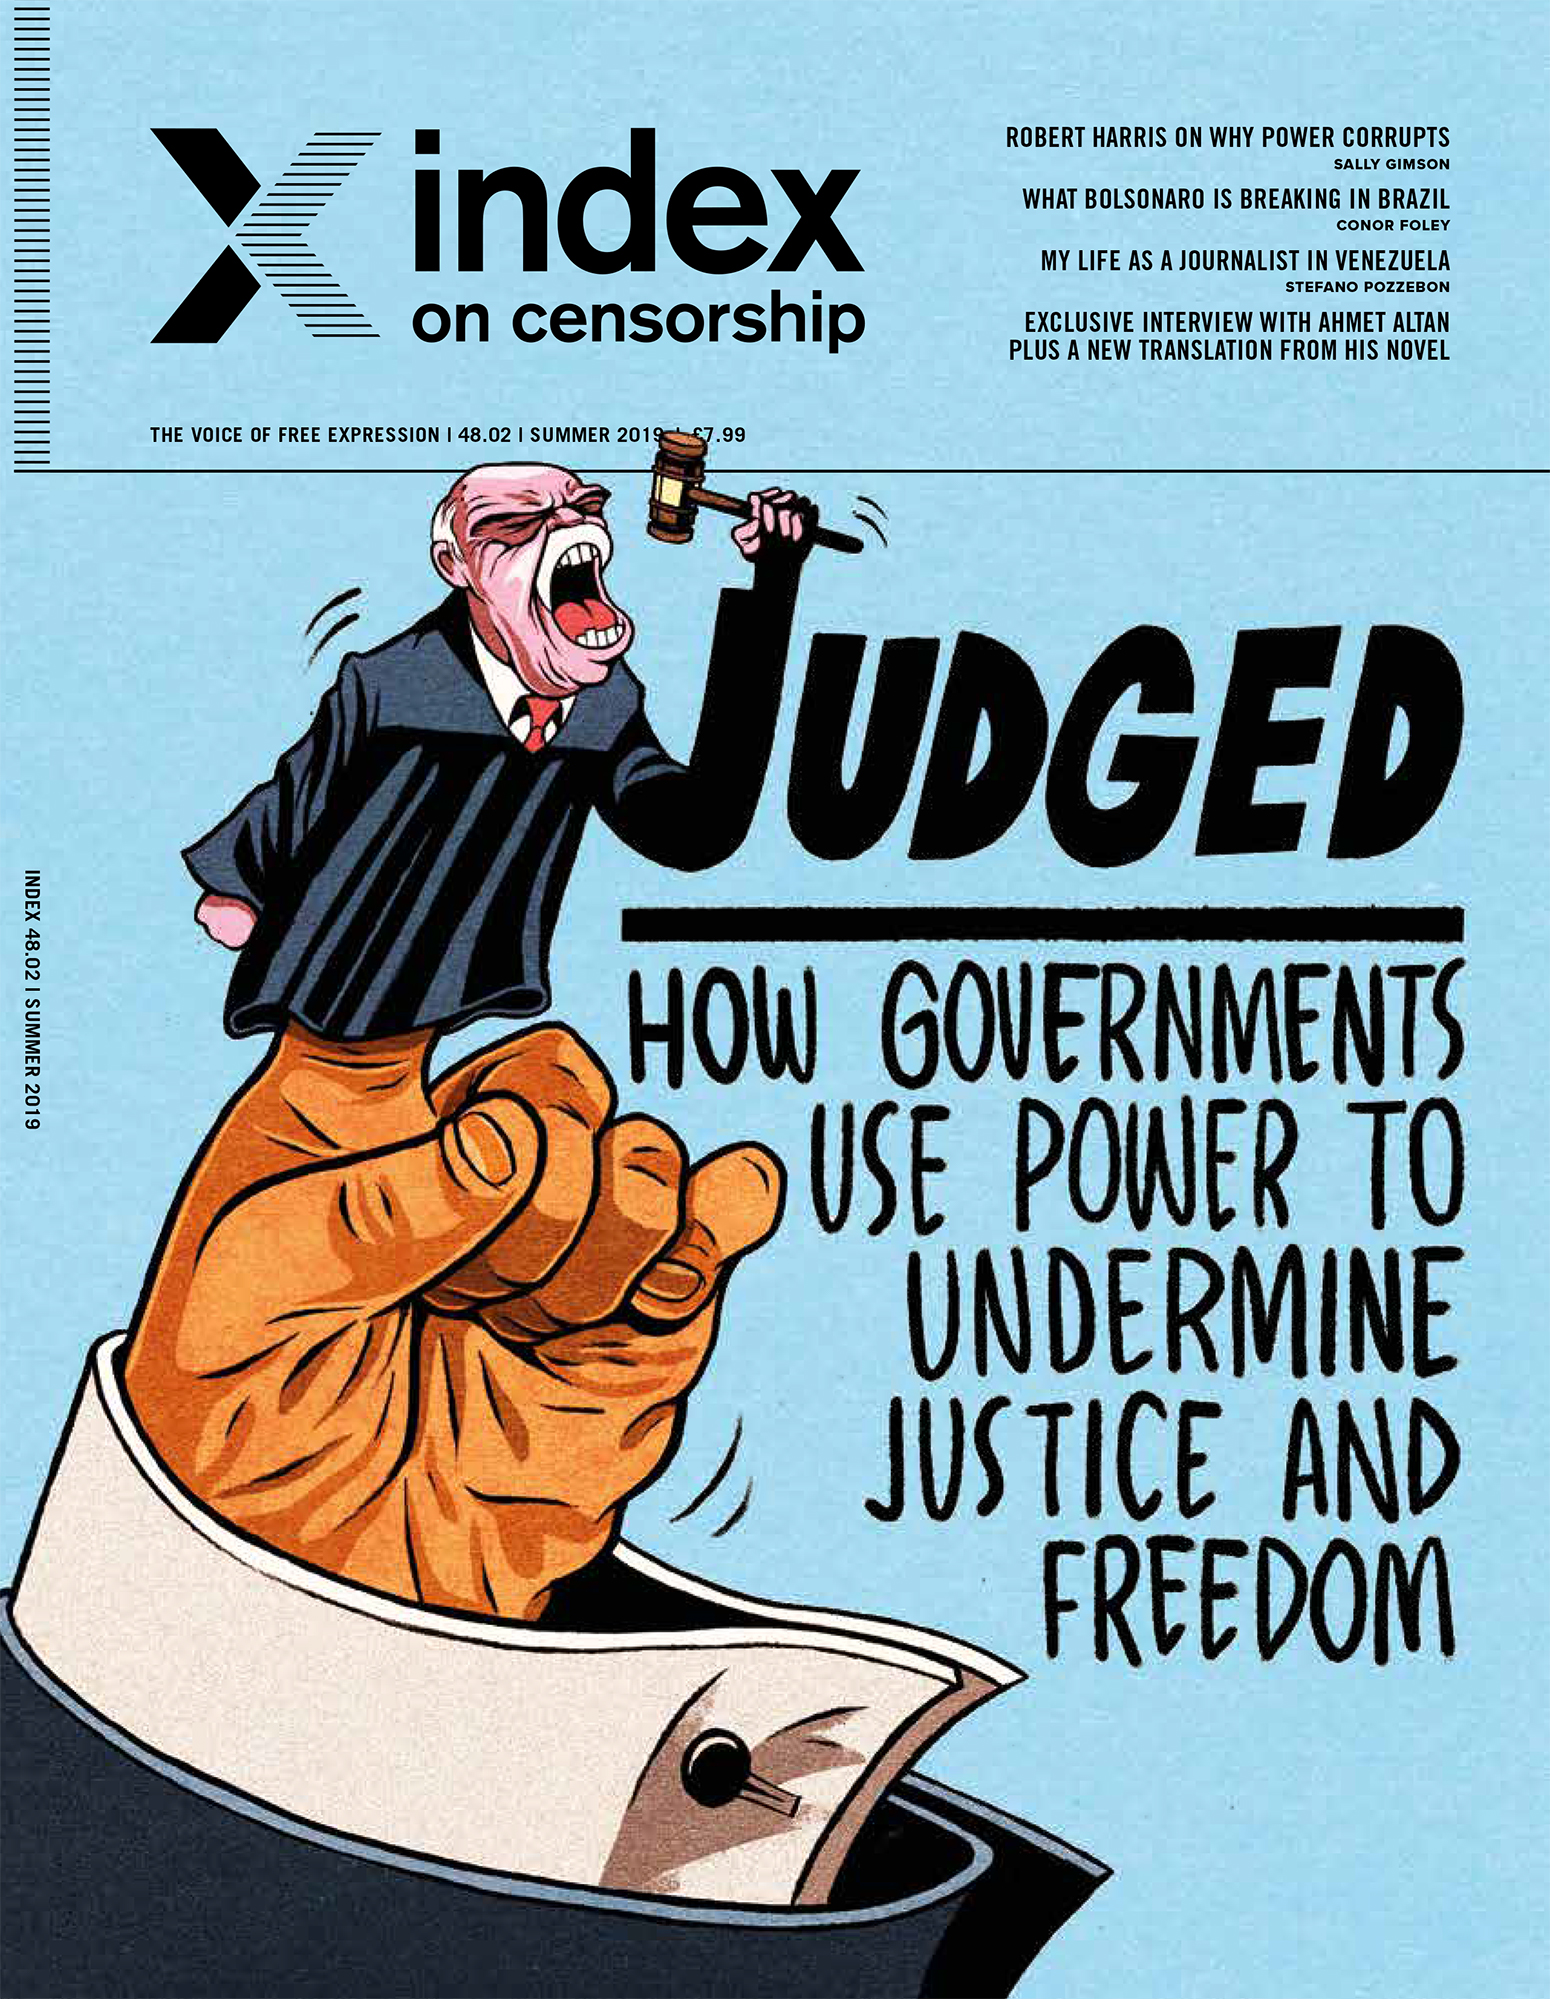 Contents: Judged: How governments use power to undermine justice and freedom